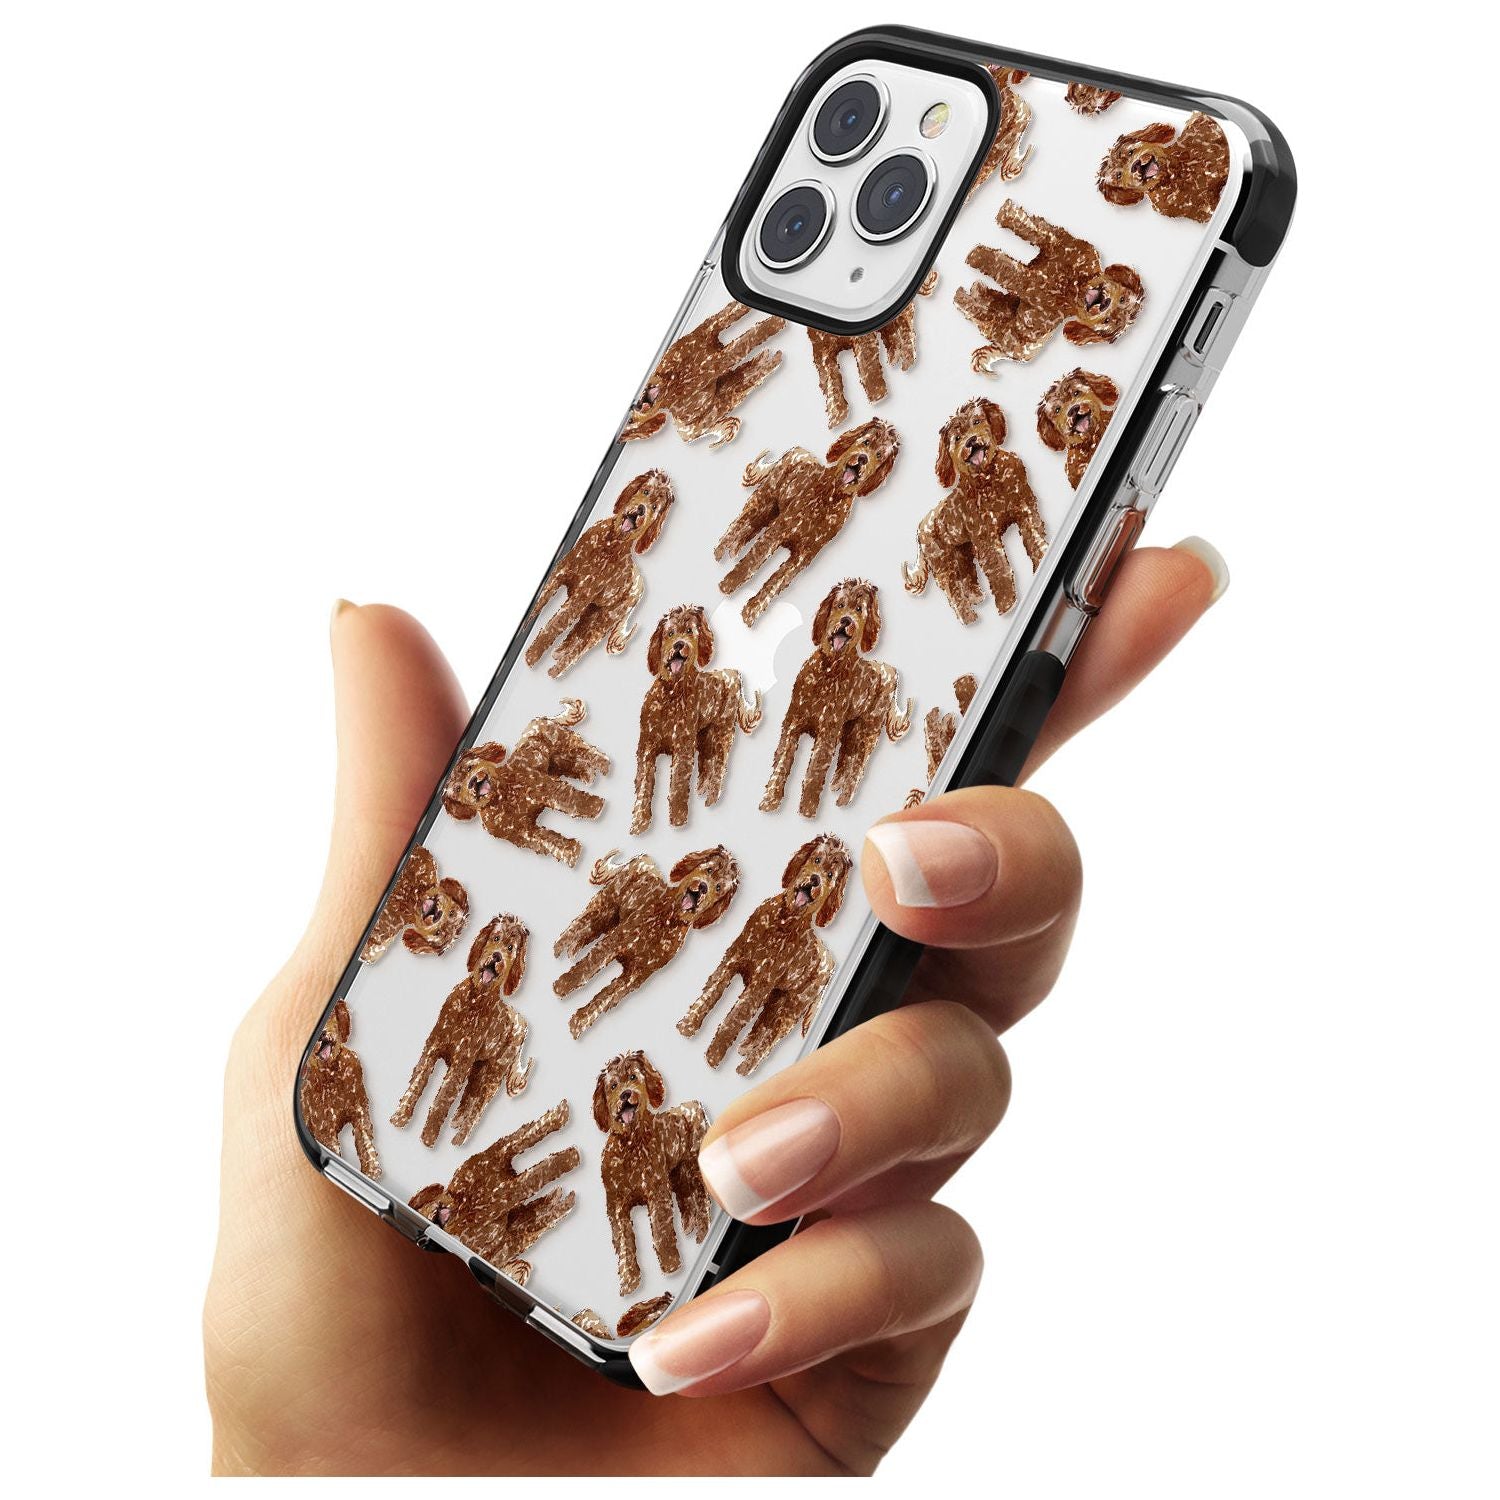 Labradoodle (Brown) Watercolour Dog Pattern Black Impact Phone Case for iPhone 11 Pro Max